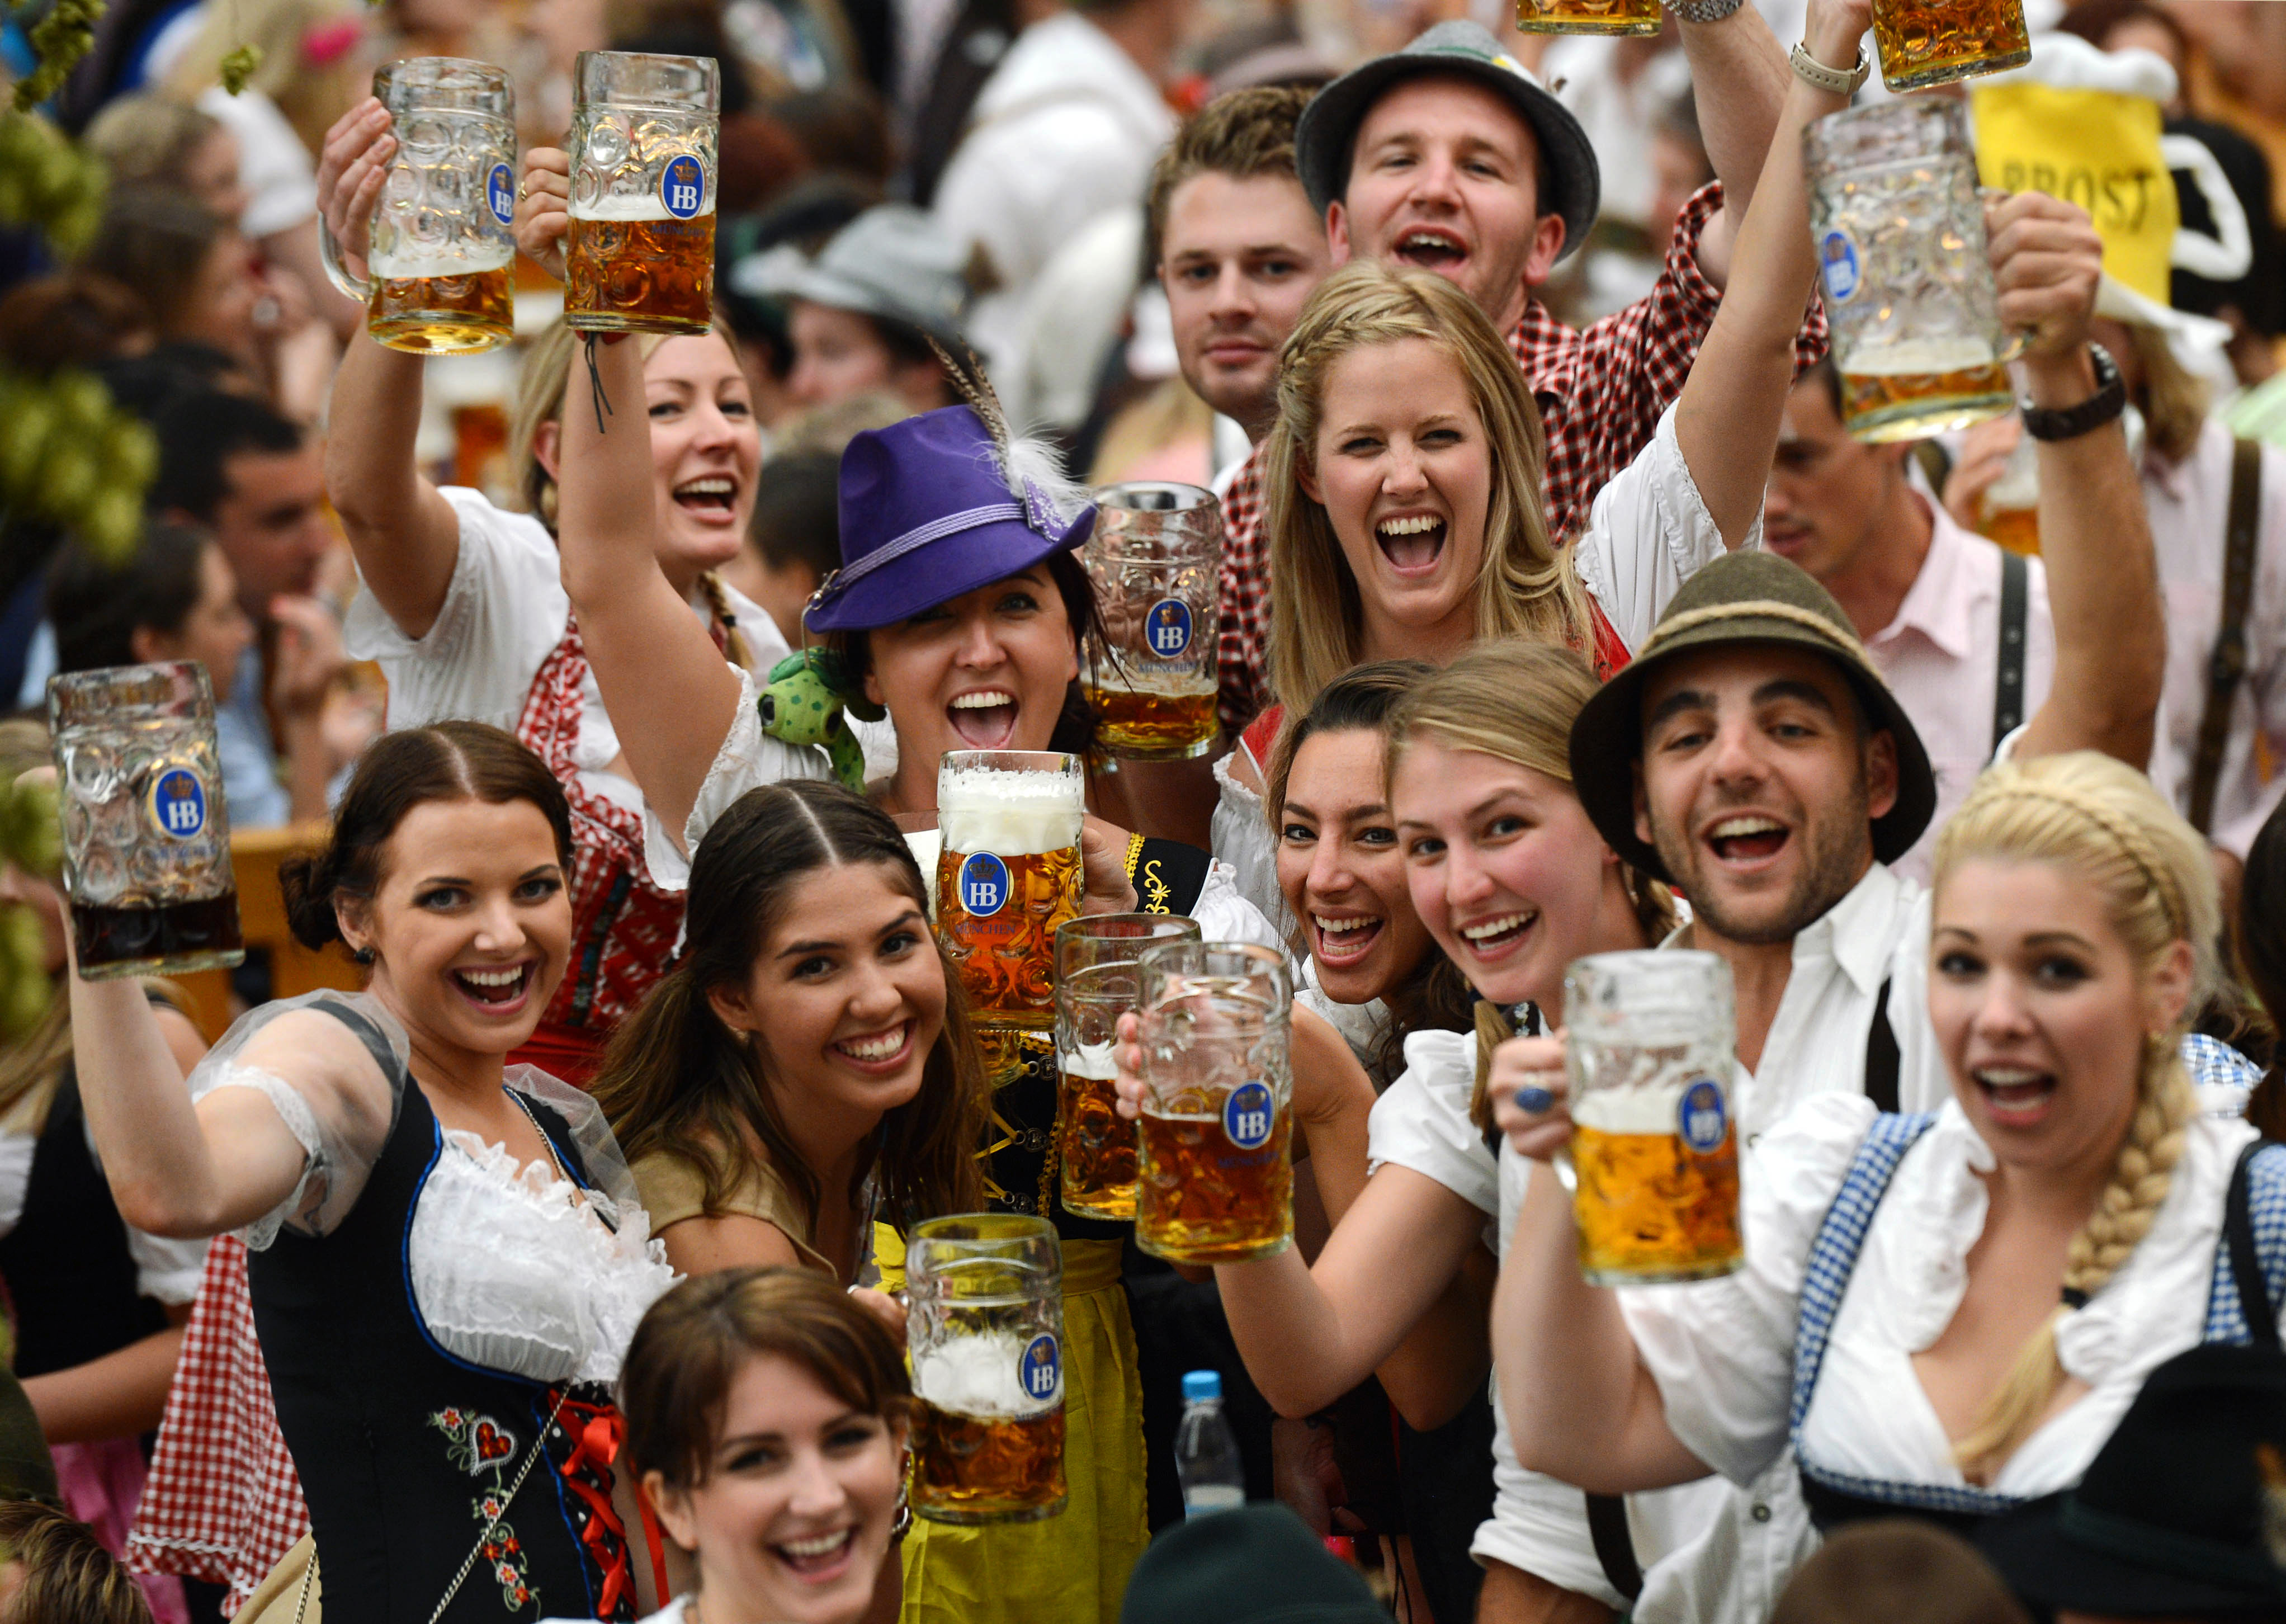 Visitors wearing traditional Bavarian clothes raise their  beers in a festival tent at the start of the Oktoberfest beer festival at the Theresienwiese in Munich, southern Germany. This year's edition of the world's biggest beer festival Oktoberfest will run until October 7, 2012. AFP PHOTO / CHRISTOF STACHE        (Photo credit should read CHRISTOF STACHE/AFP/GettyImages)